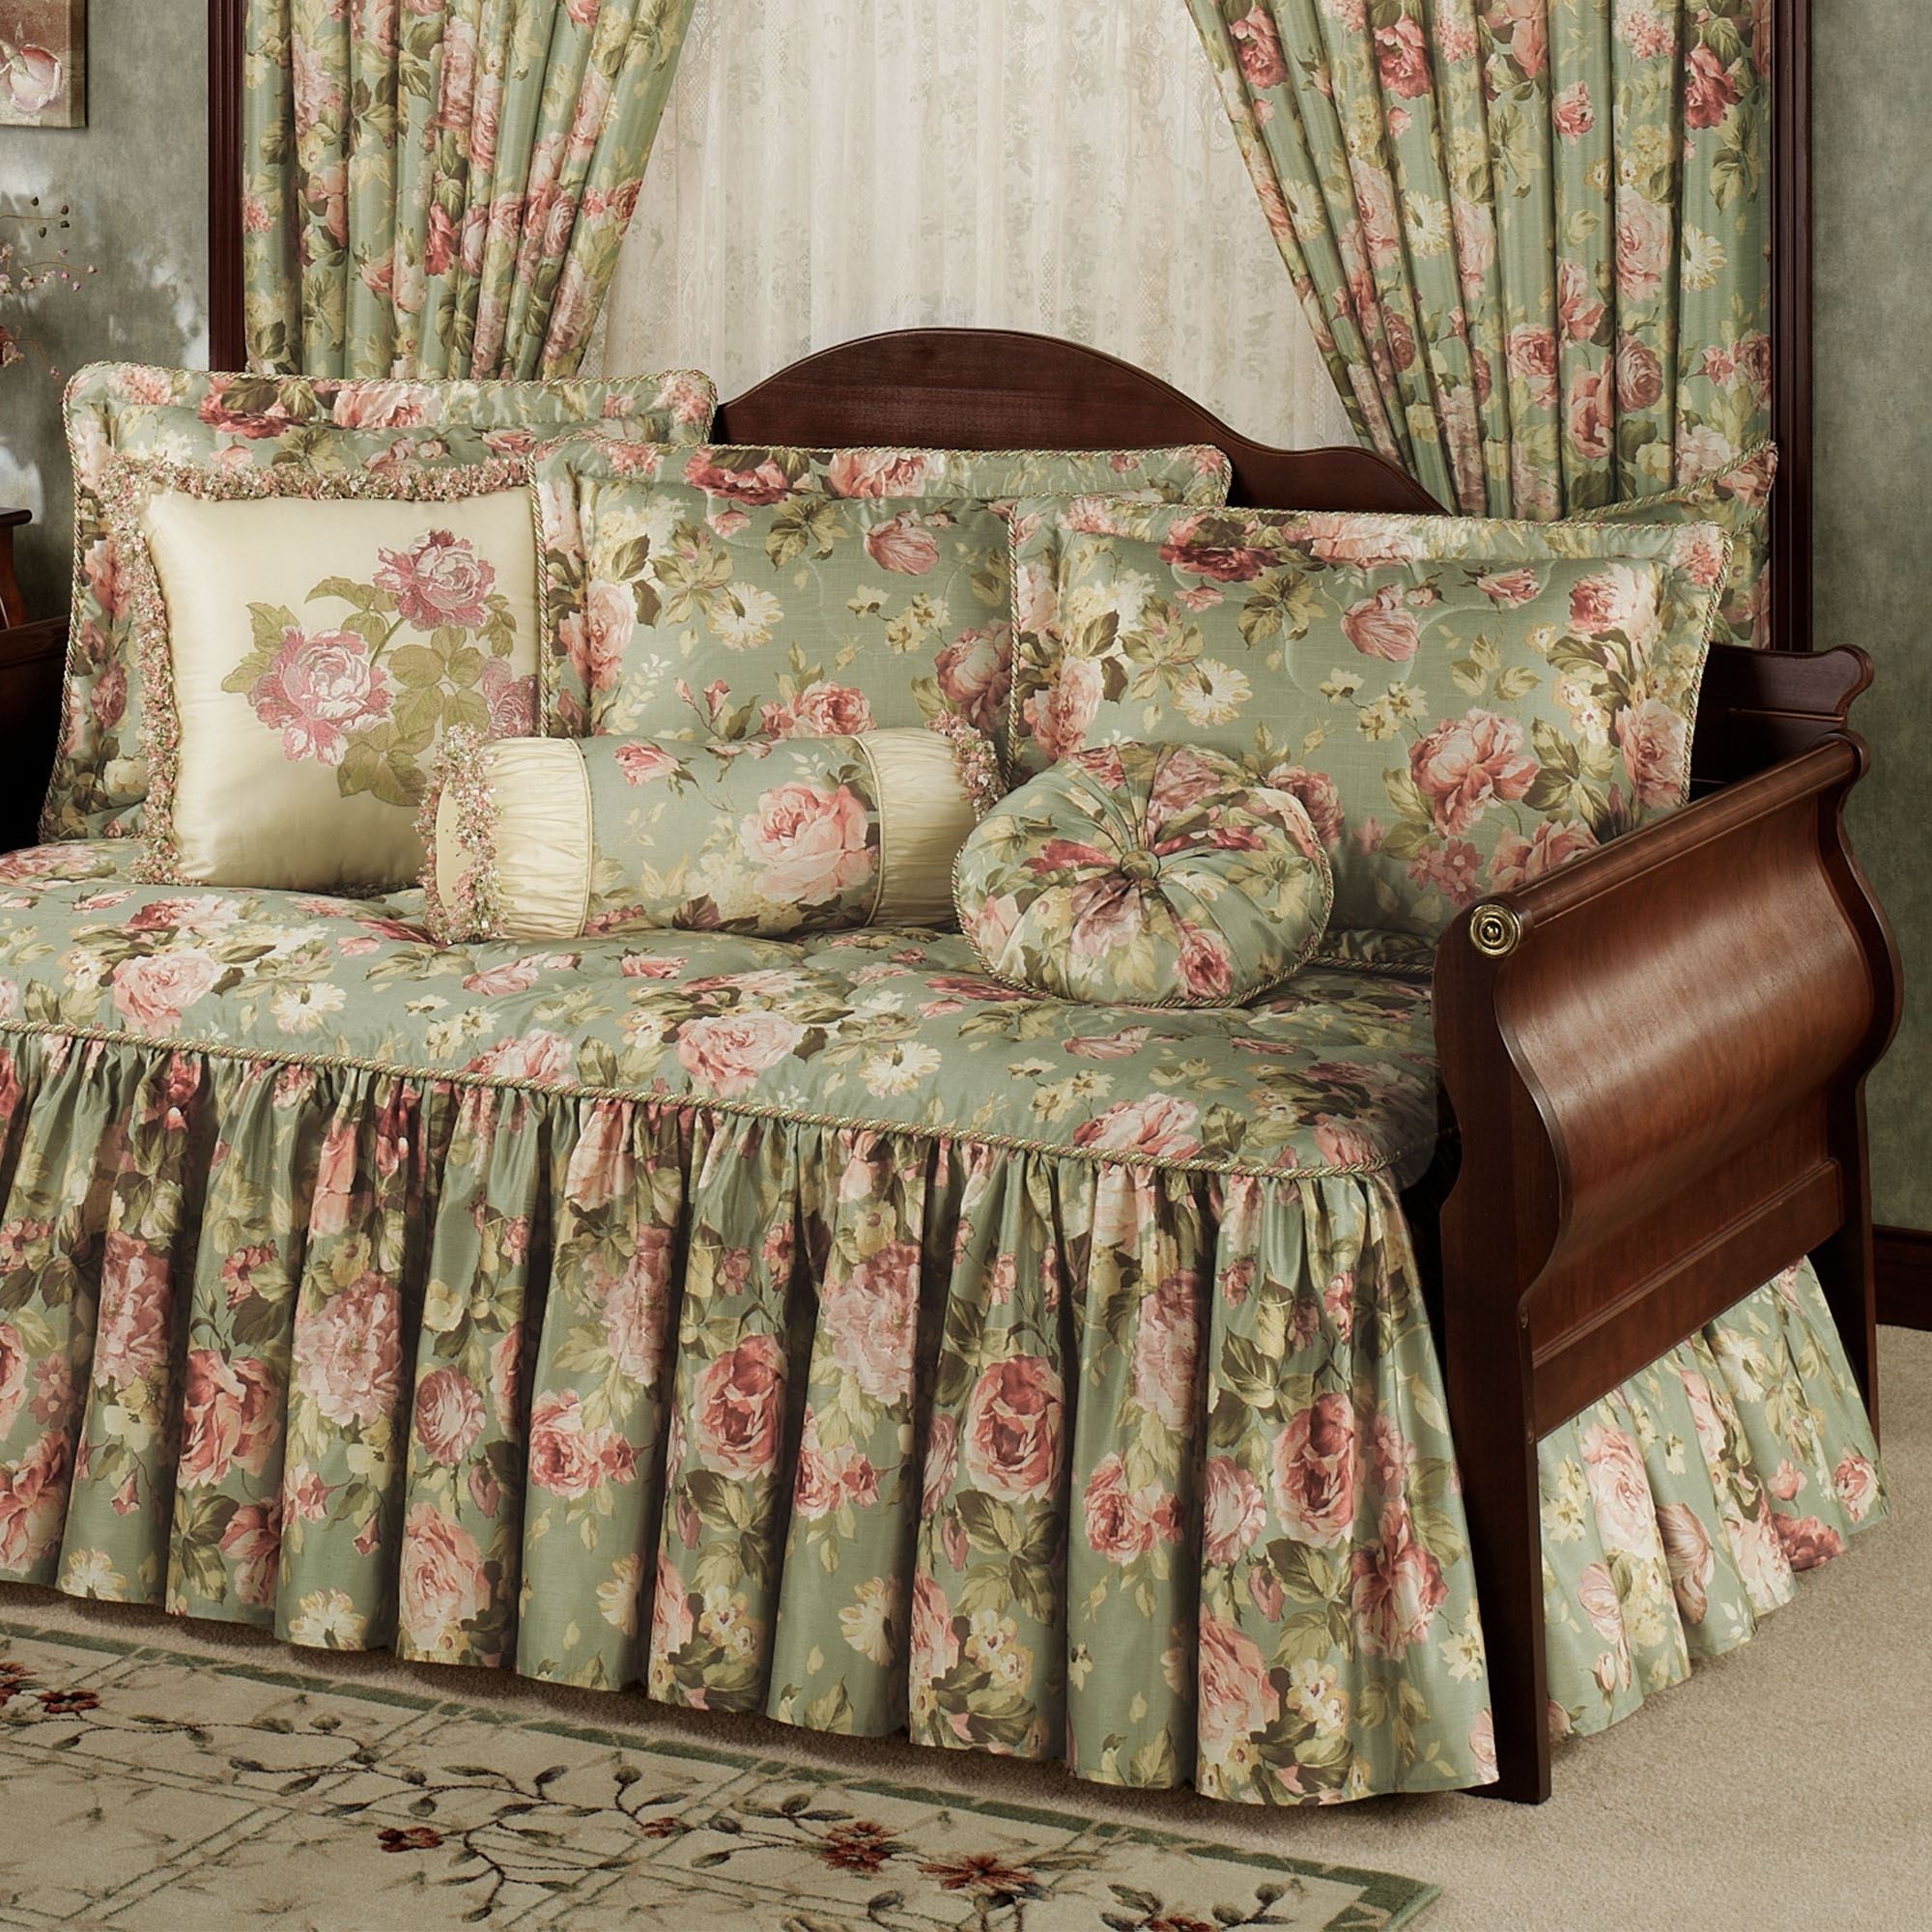 Summerfield floral daybed bedding